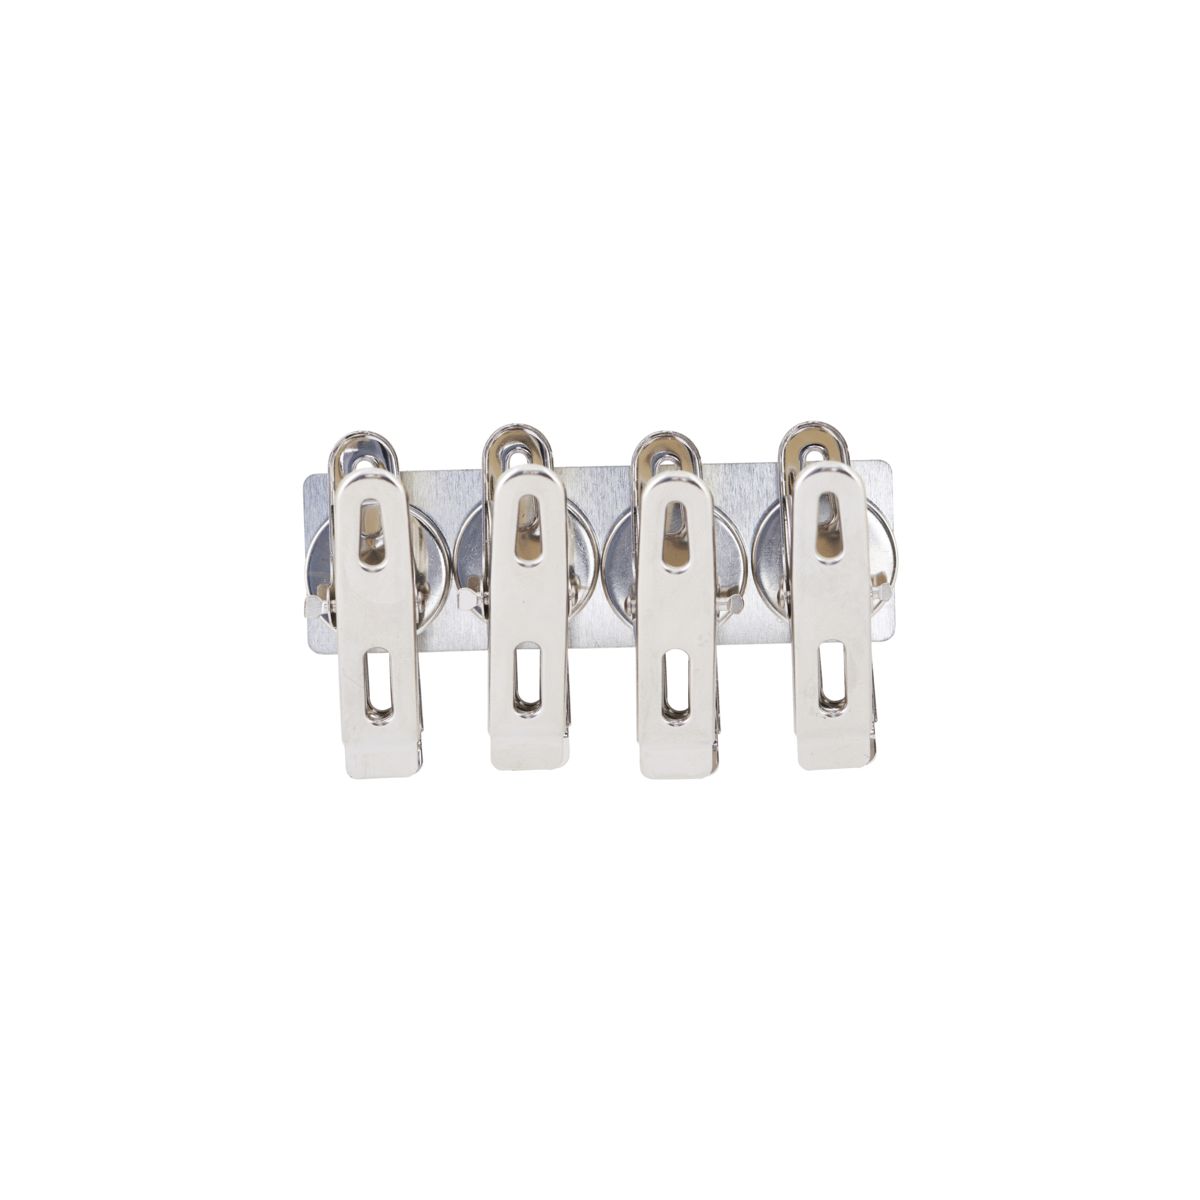 Monograph - Magnets - Clips - Silver - 4pk